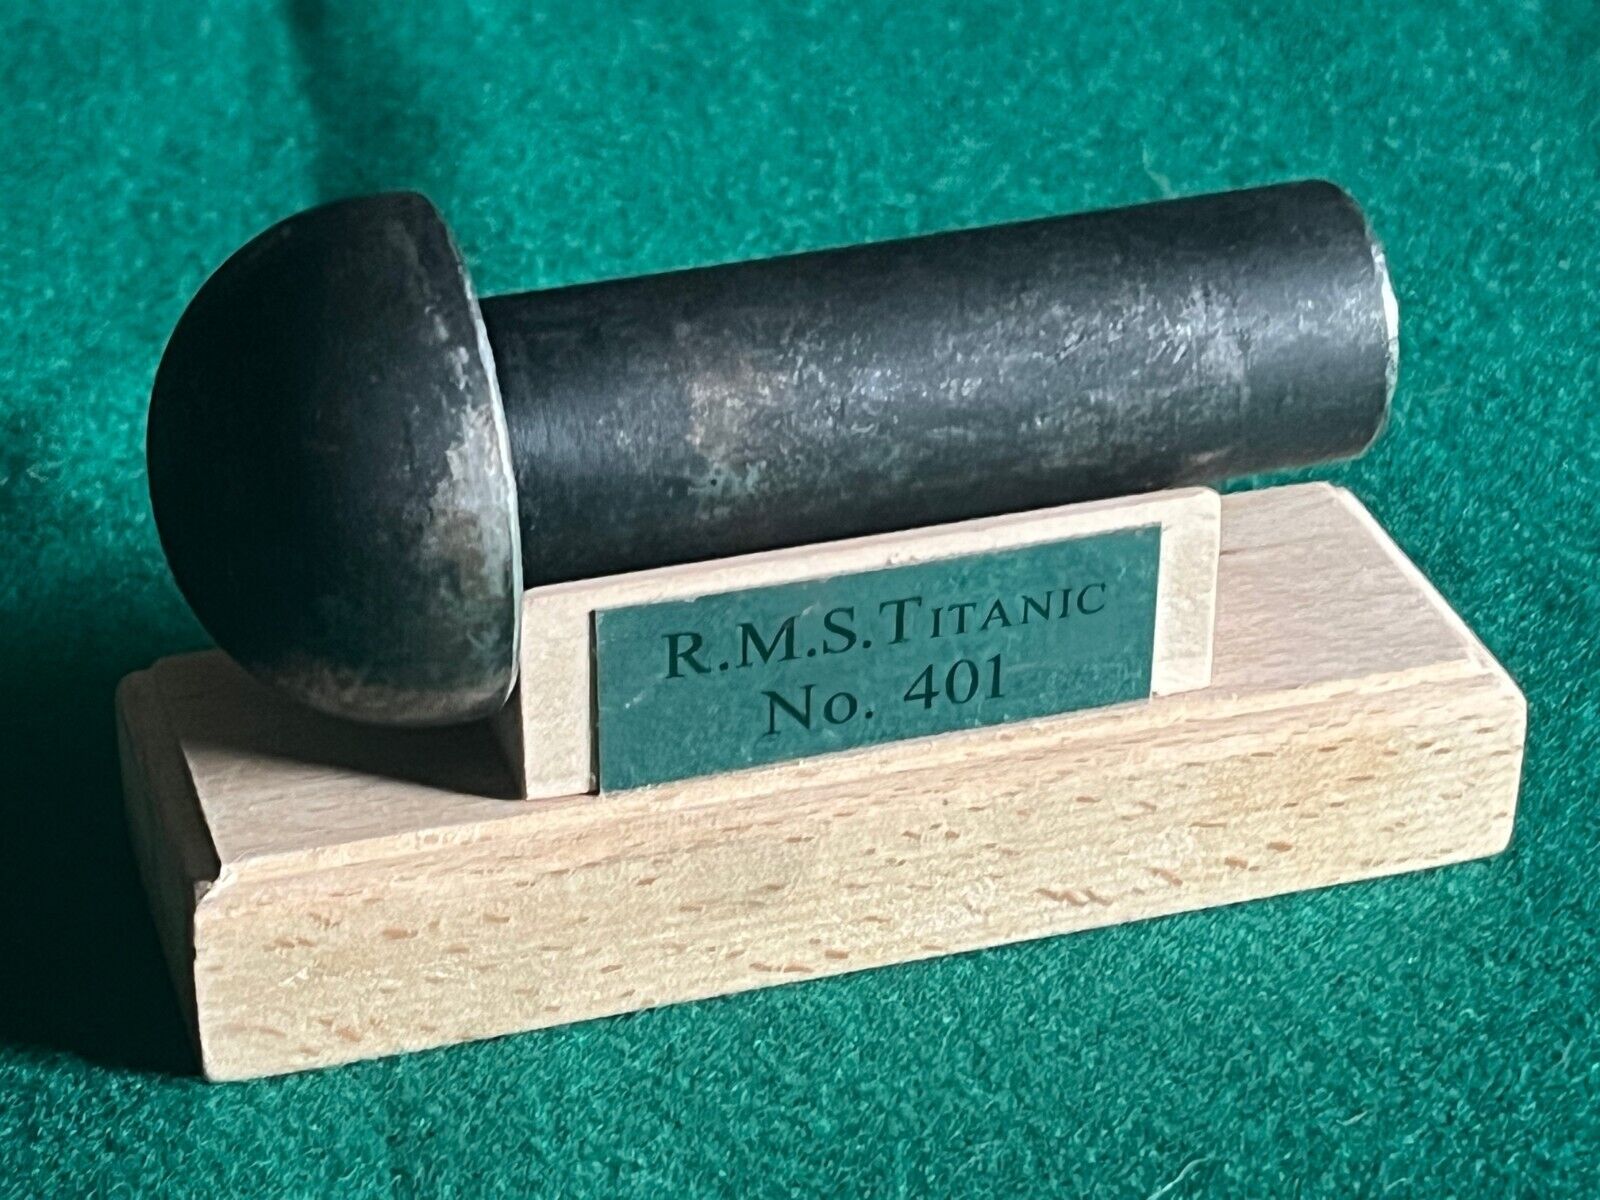 RMS Titanic #401 Replica Rivet with stand, highly collectable, and rare